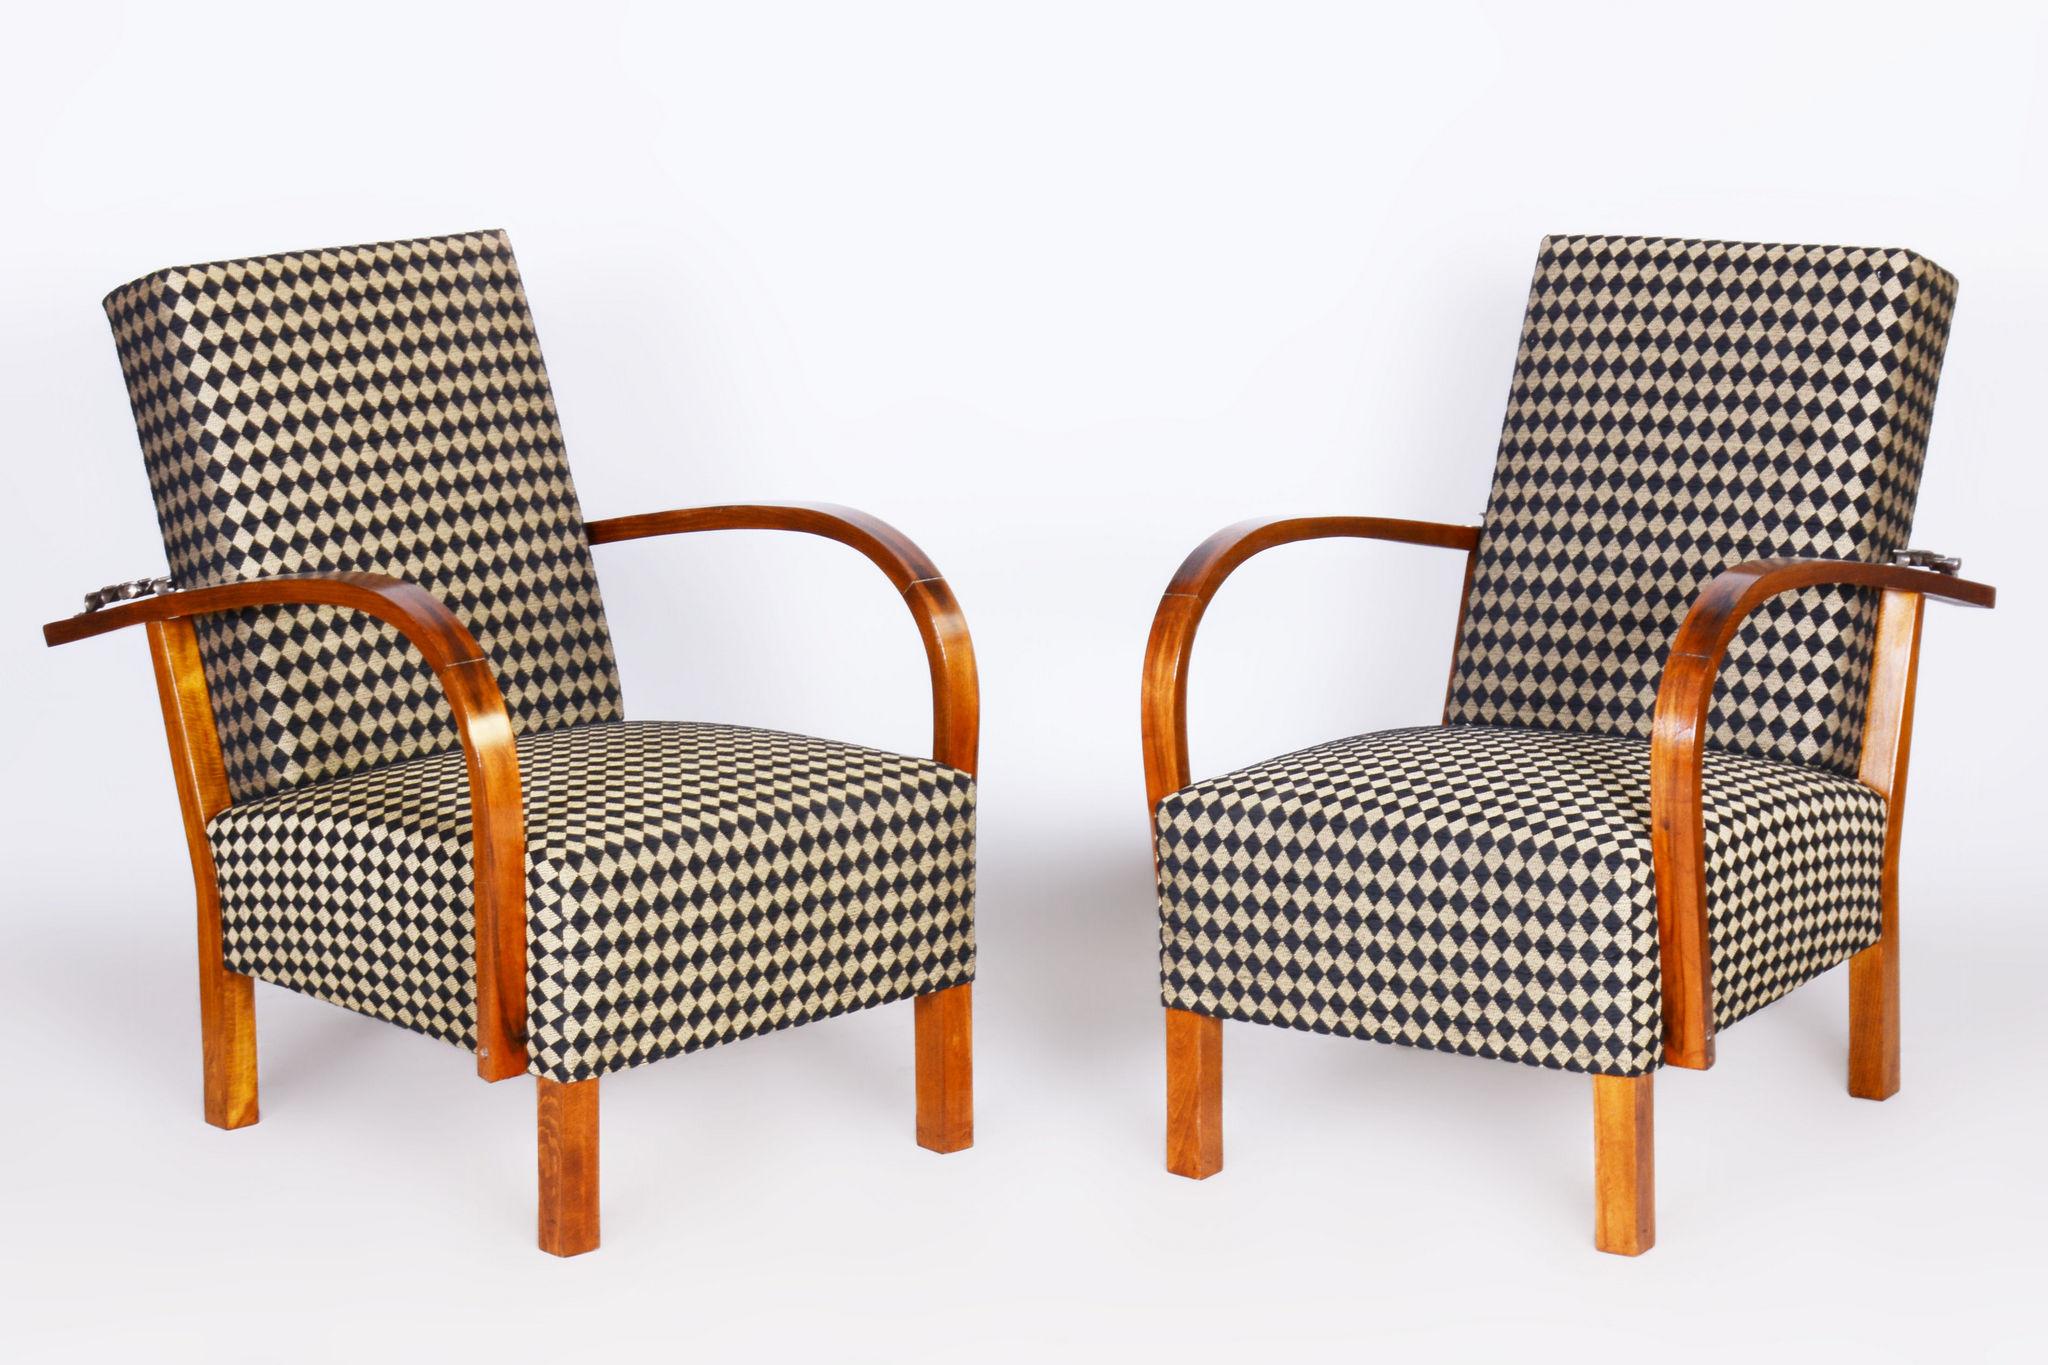 Restored ArtDeco Walnut Pair of Reclining Chairs, New Upholstery, Czechia, 1930s For Sale 3